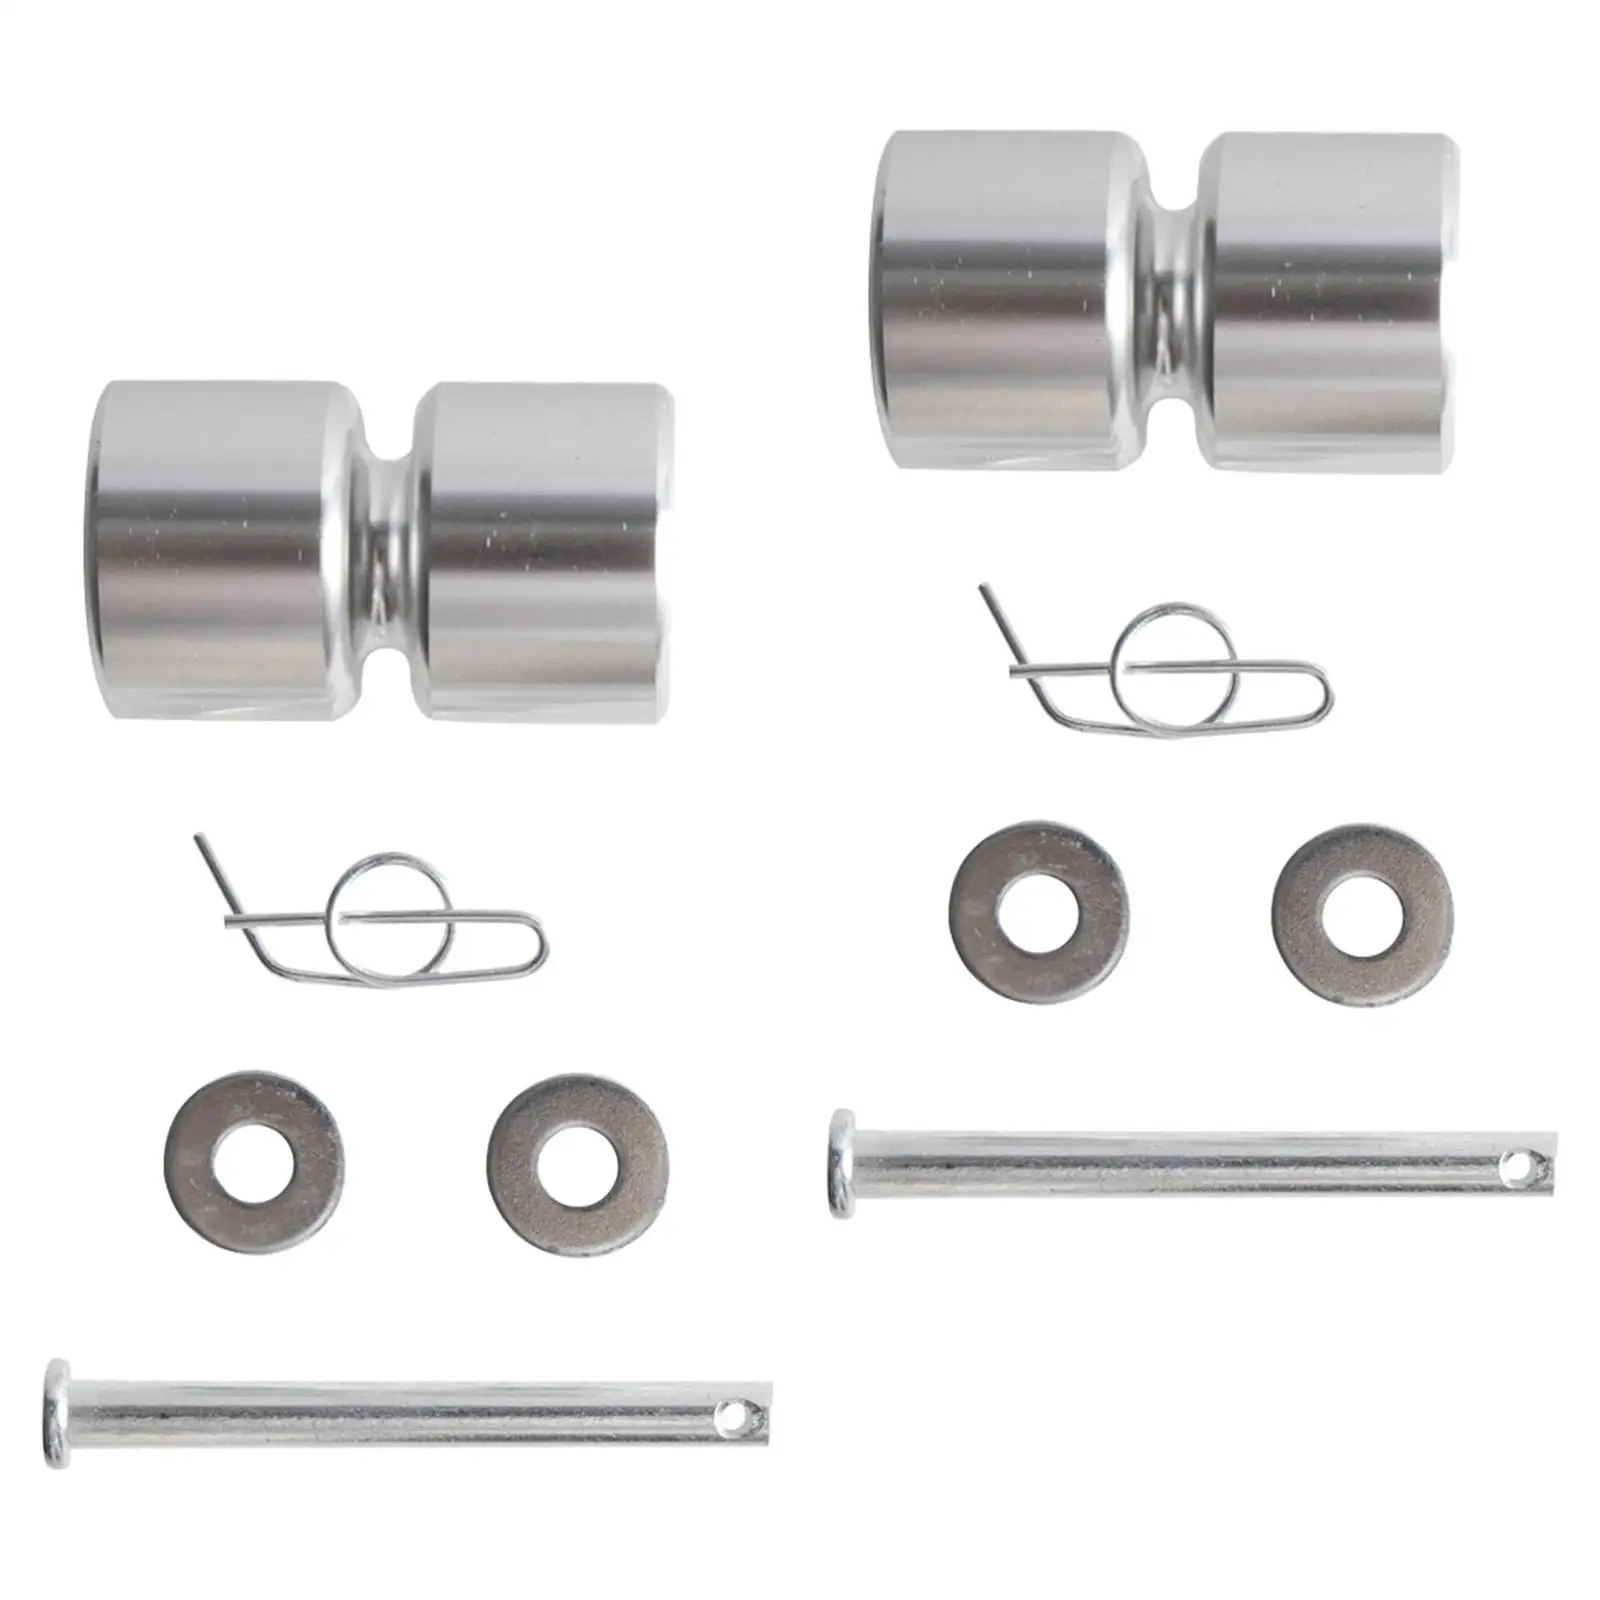 Sturdy Tailgate Lift Rollers Parts Replacement Accessories Professional Fittings